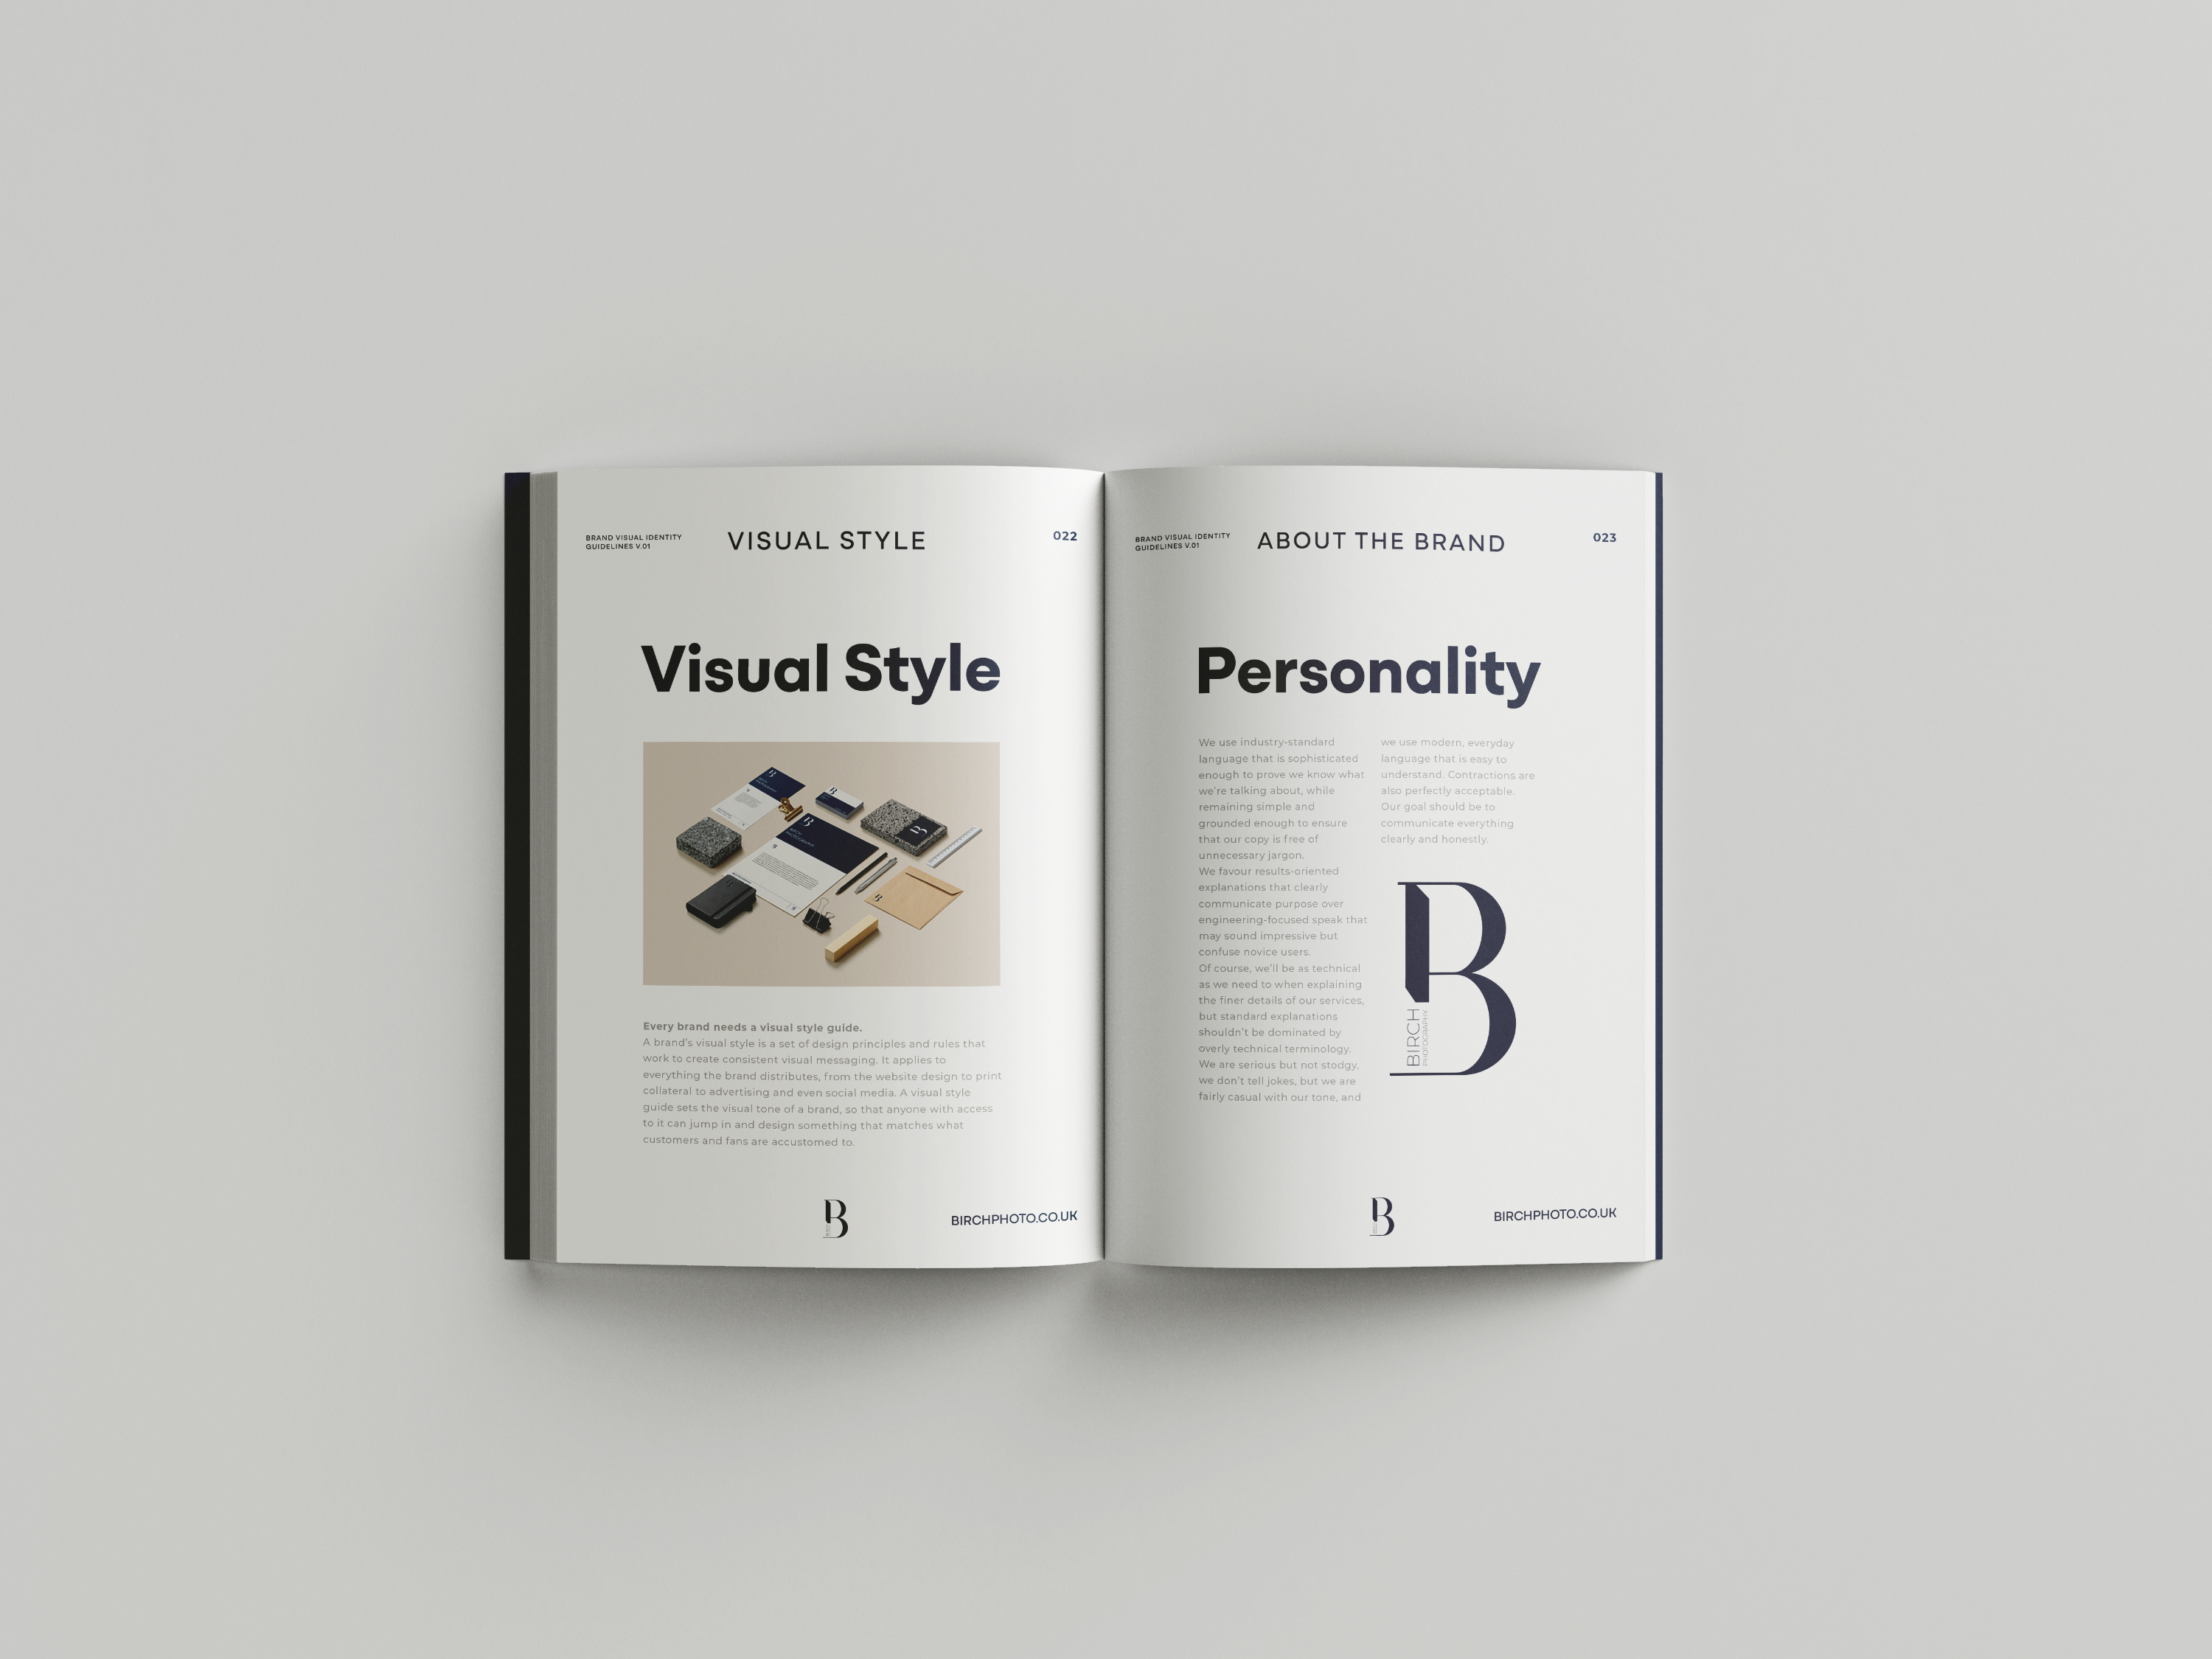 The brand guidelines open on the pages about the personality of the business.